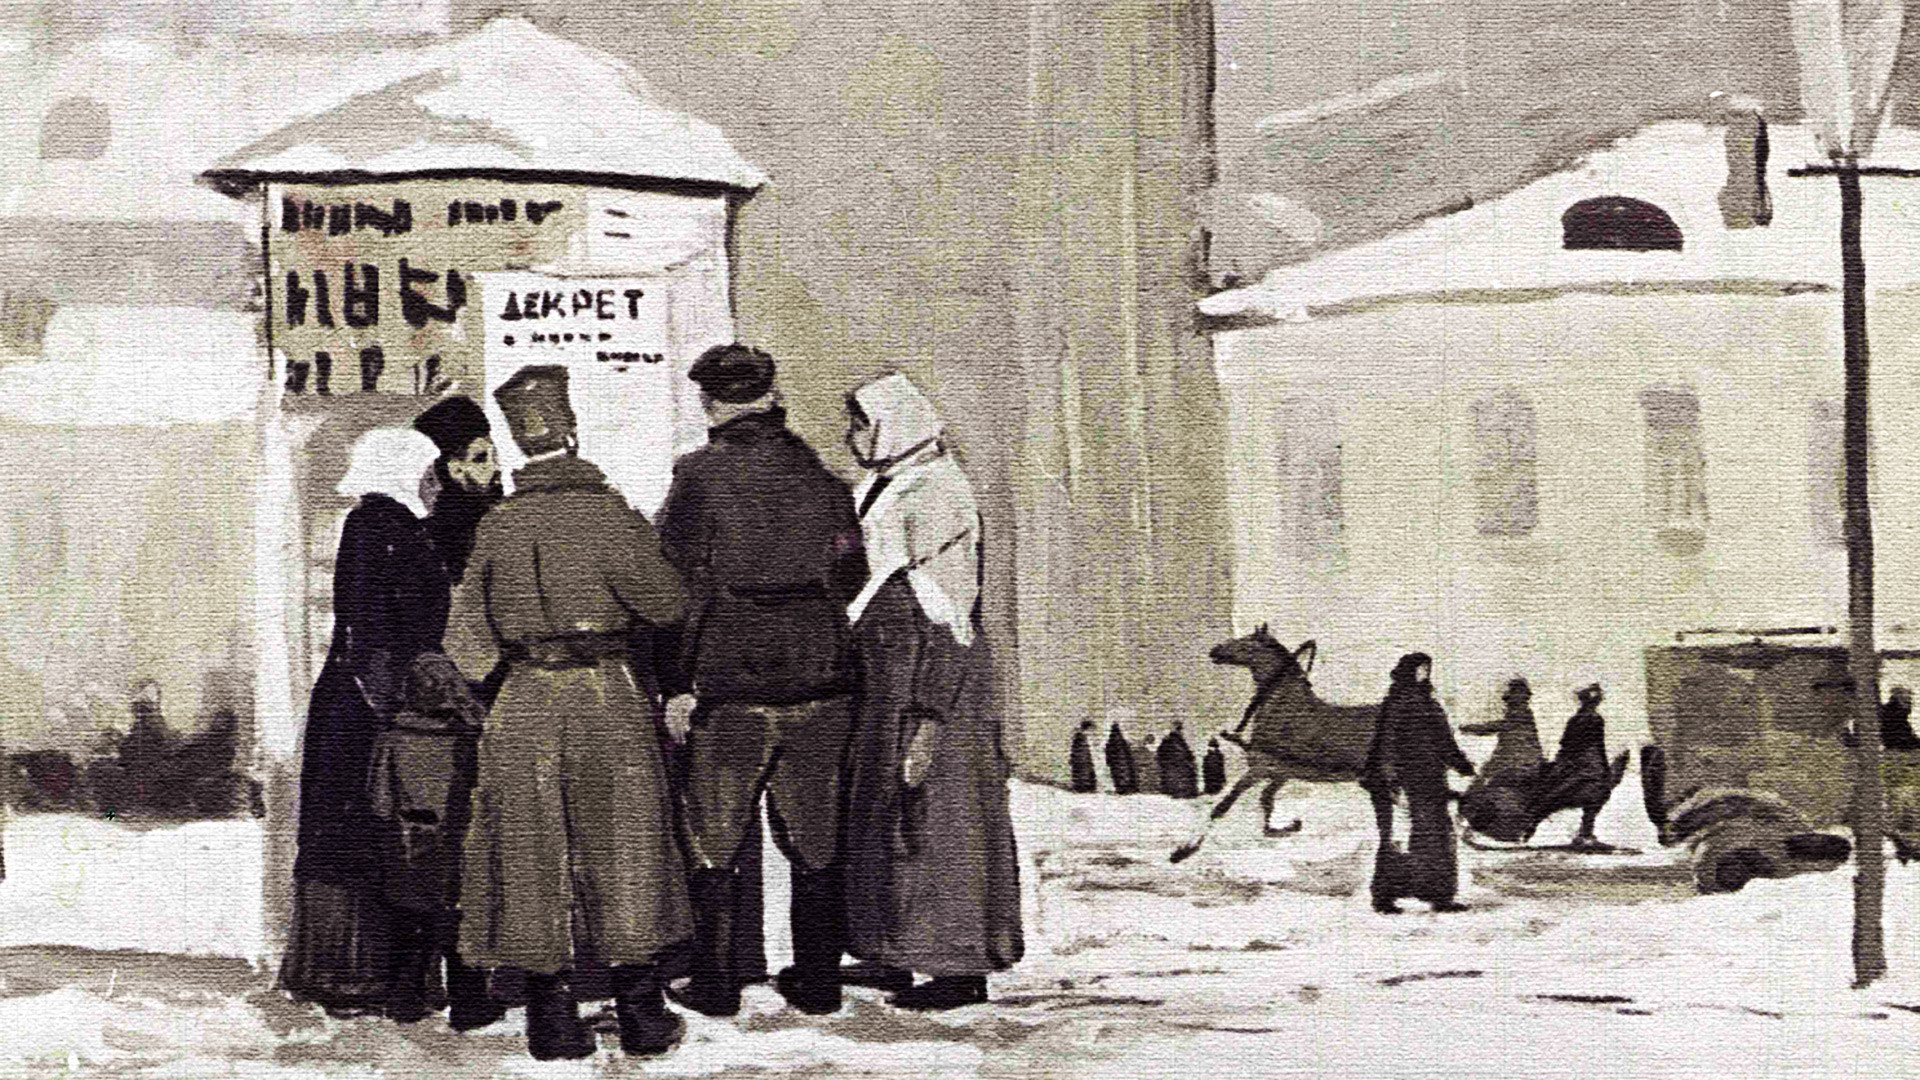 People gathered to read one of the decrees issued by the Bolsheviks, painting.